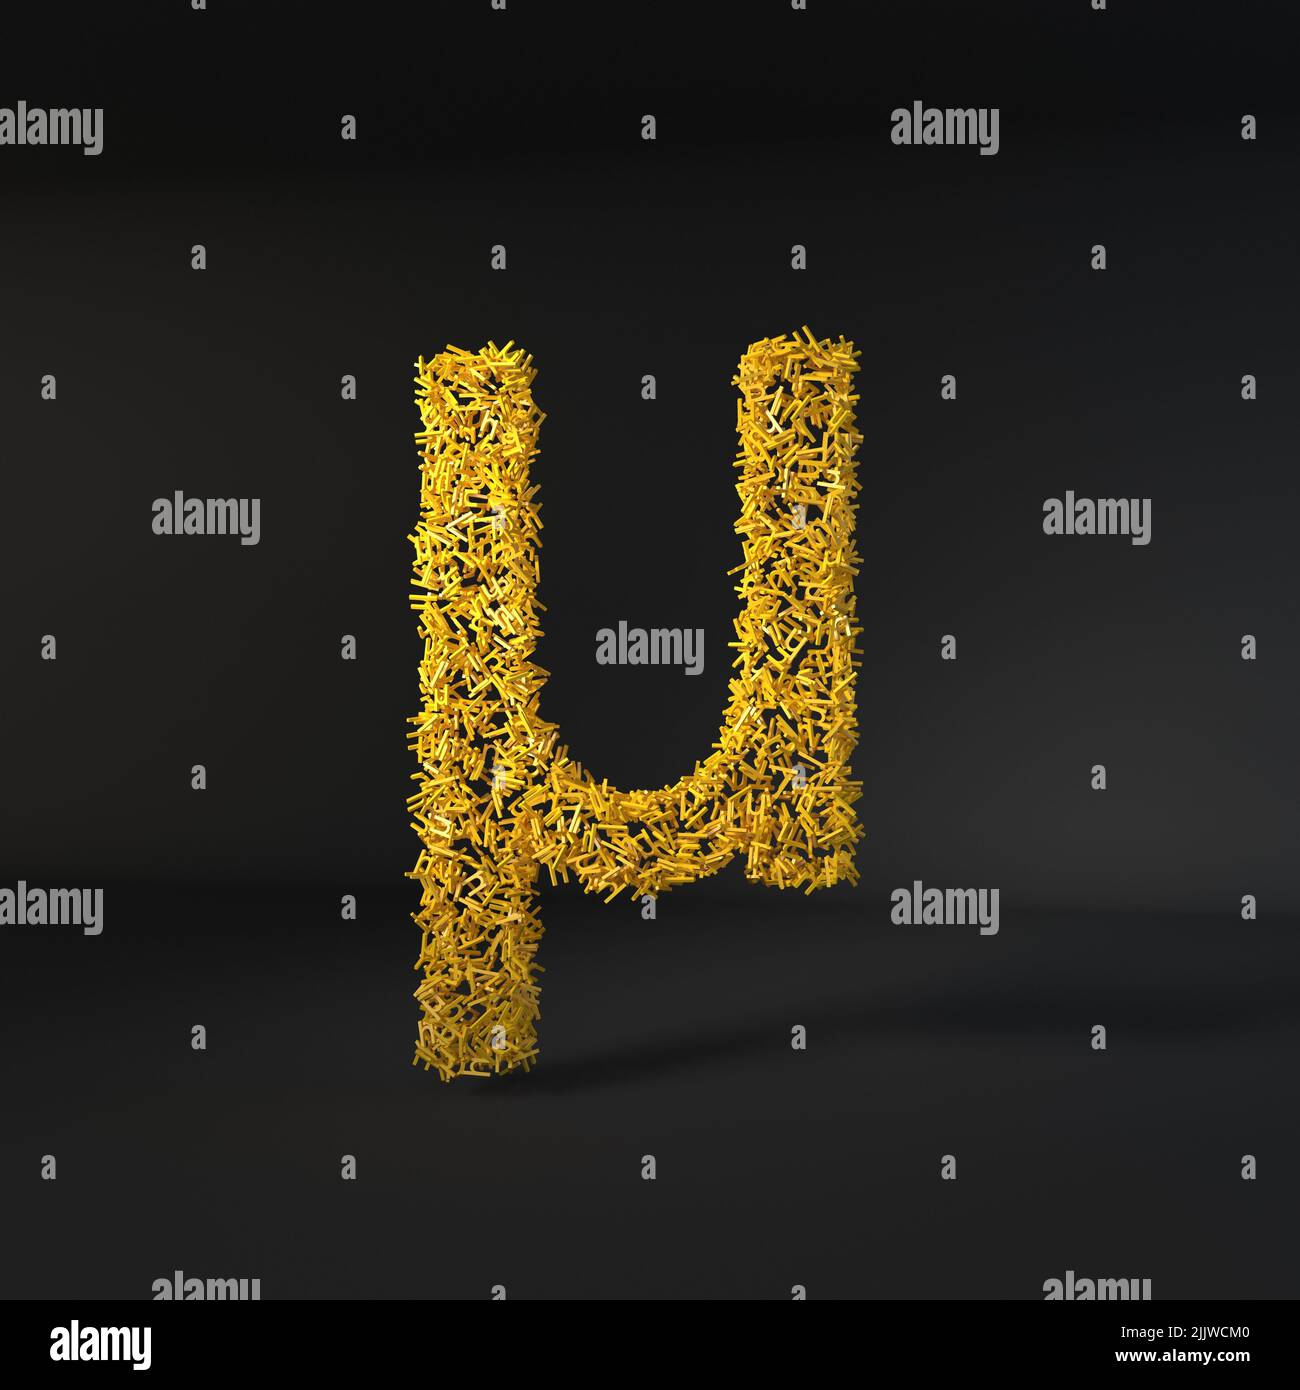 Scattered yellow letter isolated over a black background Stock Photo